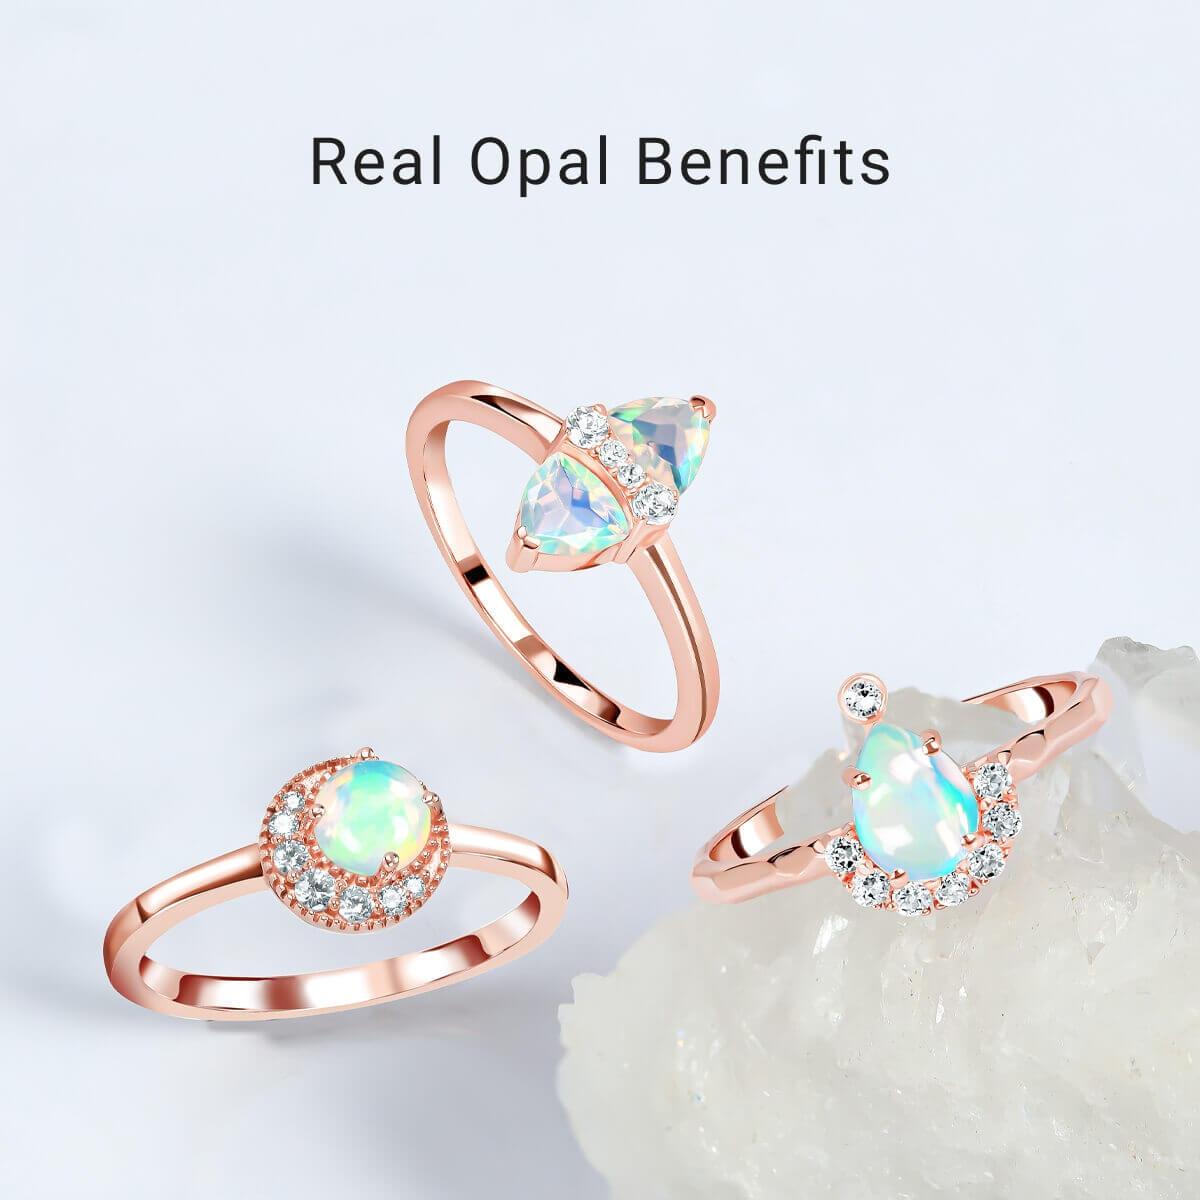 Benefits Of Real Opal